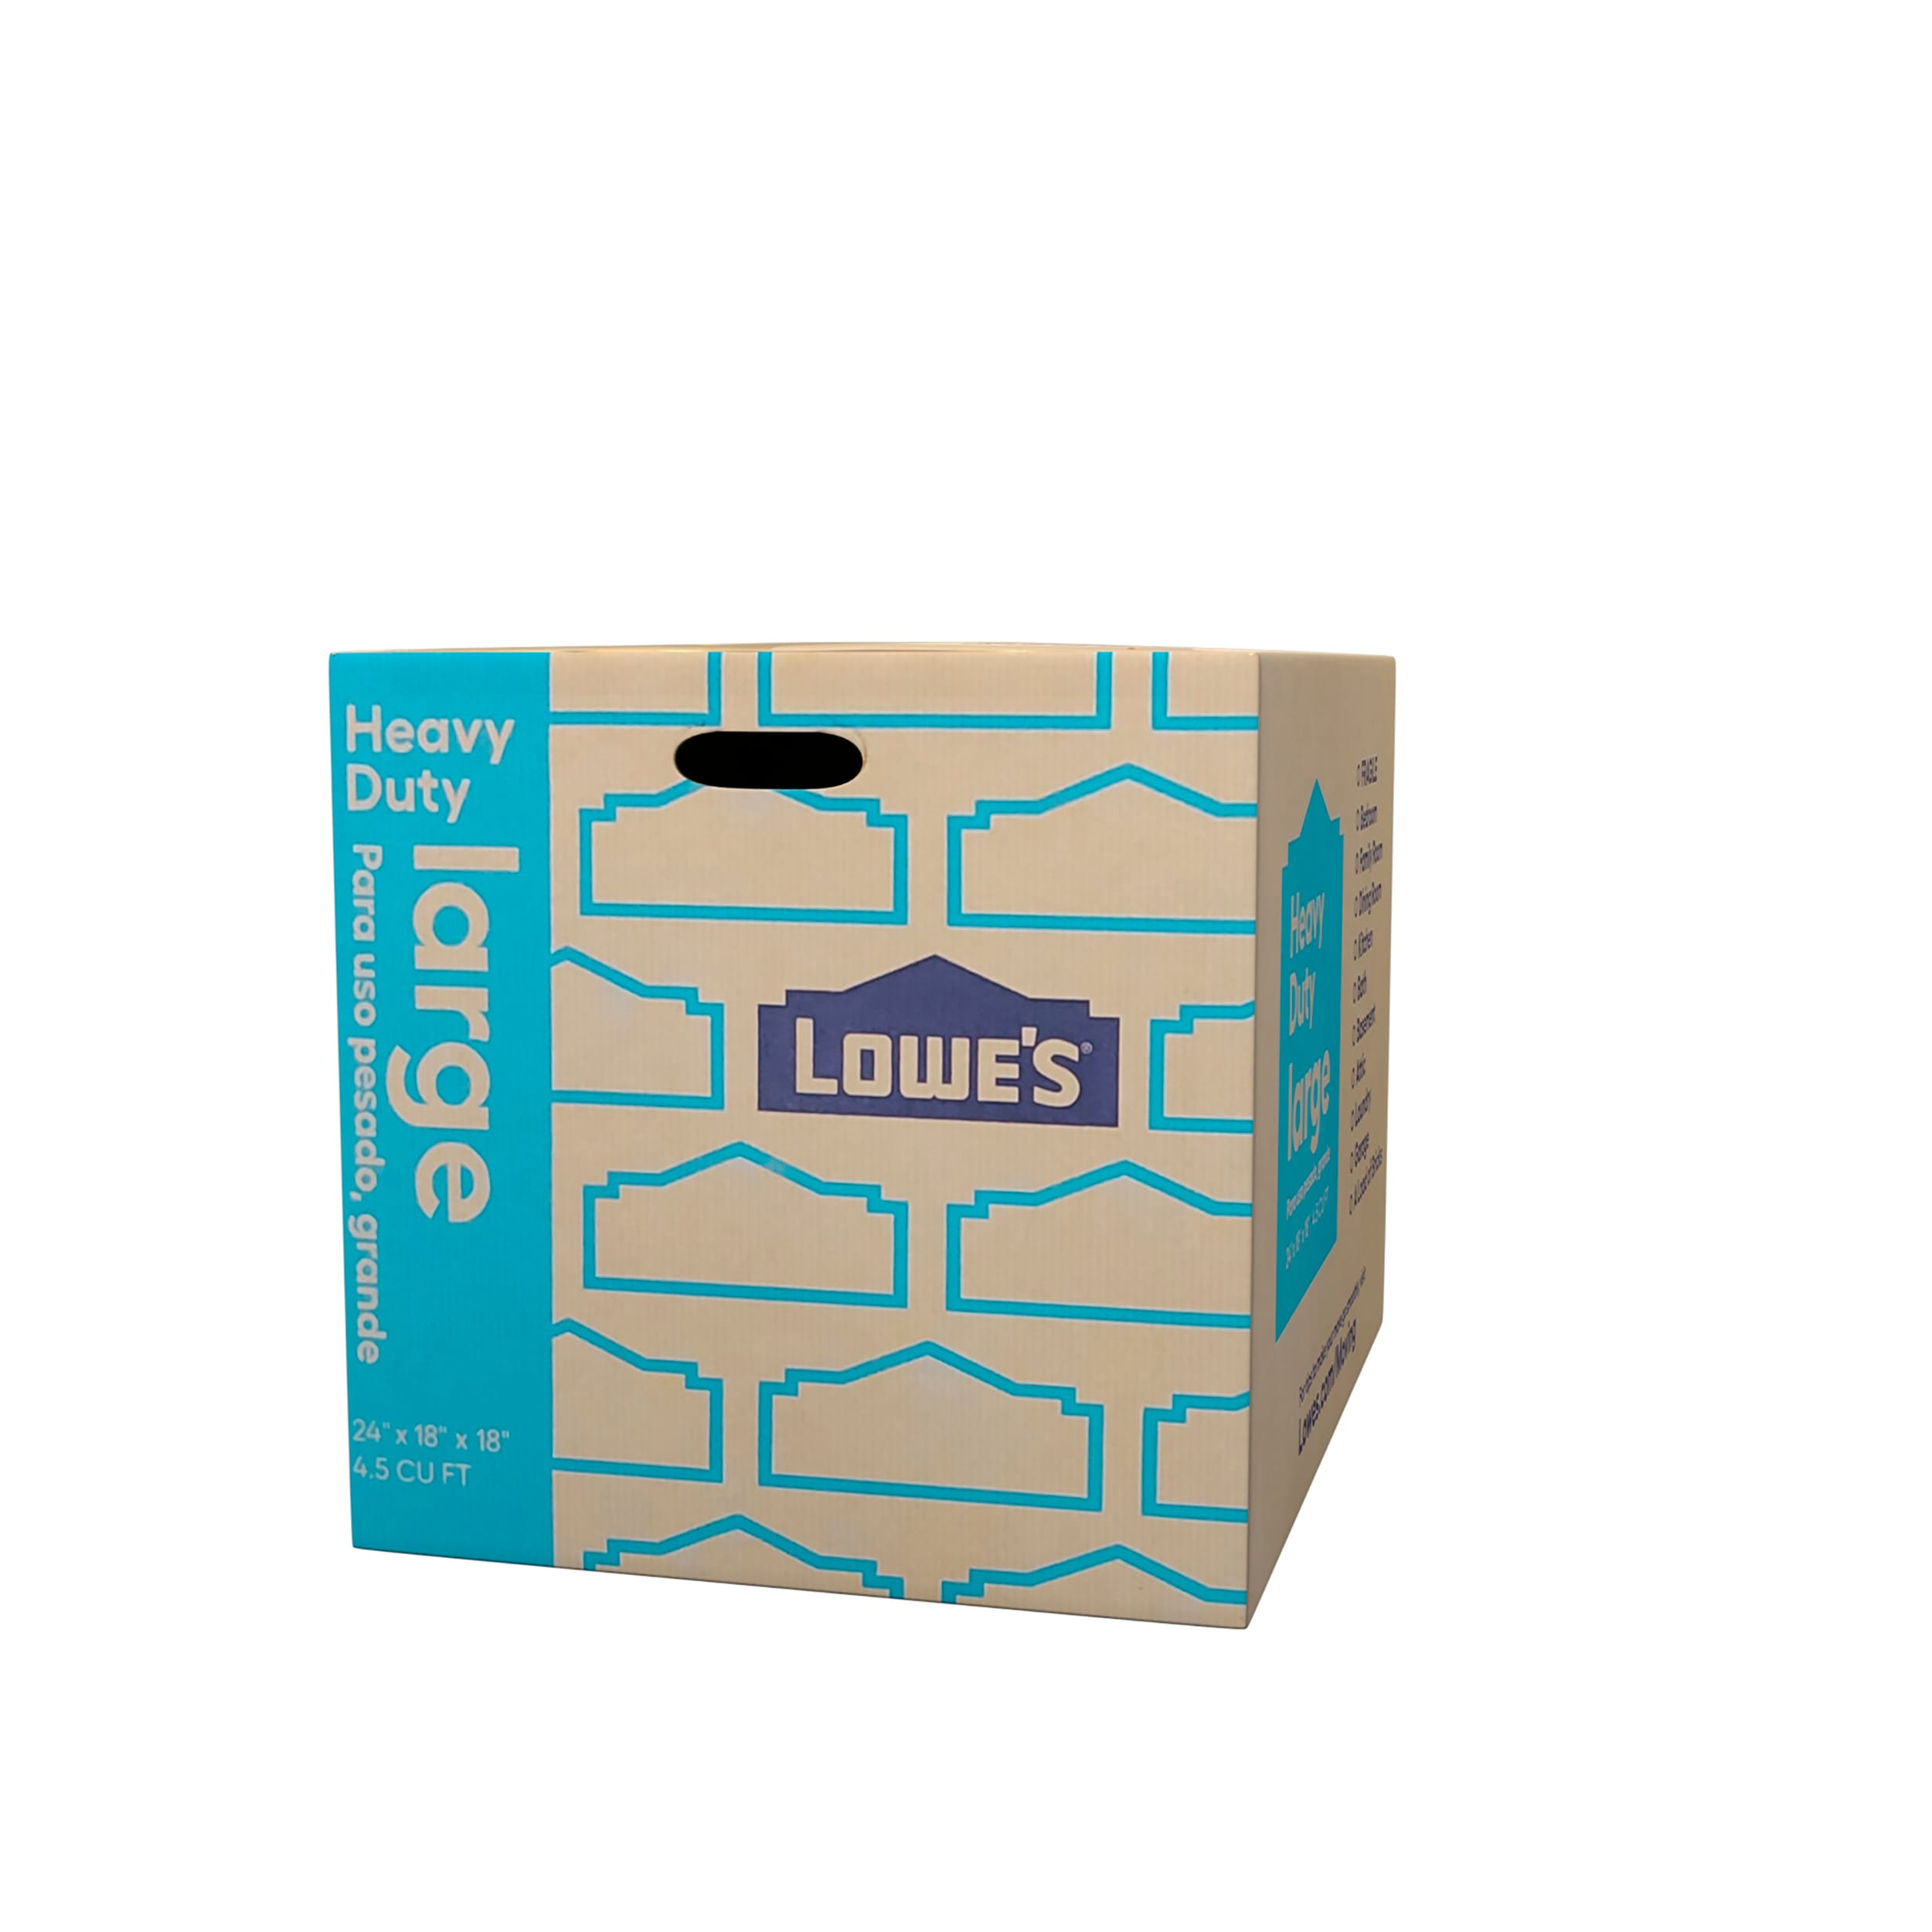 Lowe's 24-in W x 18-in H x 18-in D Large Heavy Duty Cardboard Moving Box  with Handle Holes in the Moving Boxes department at